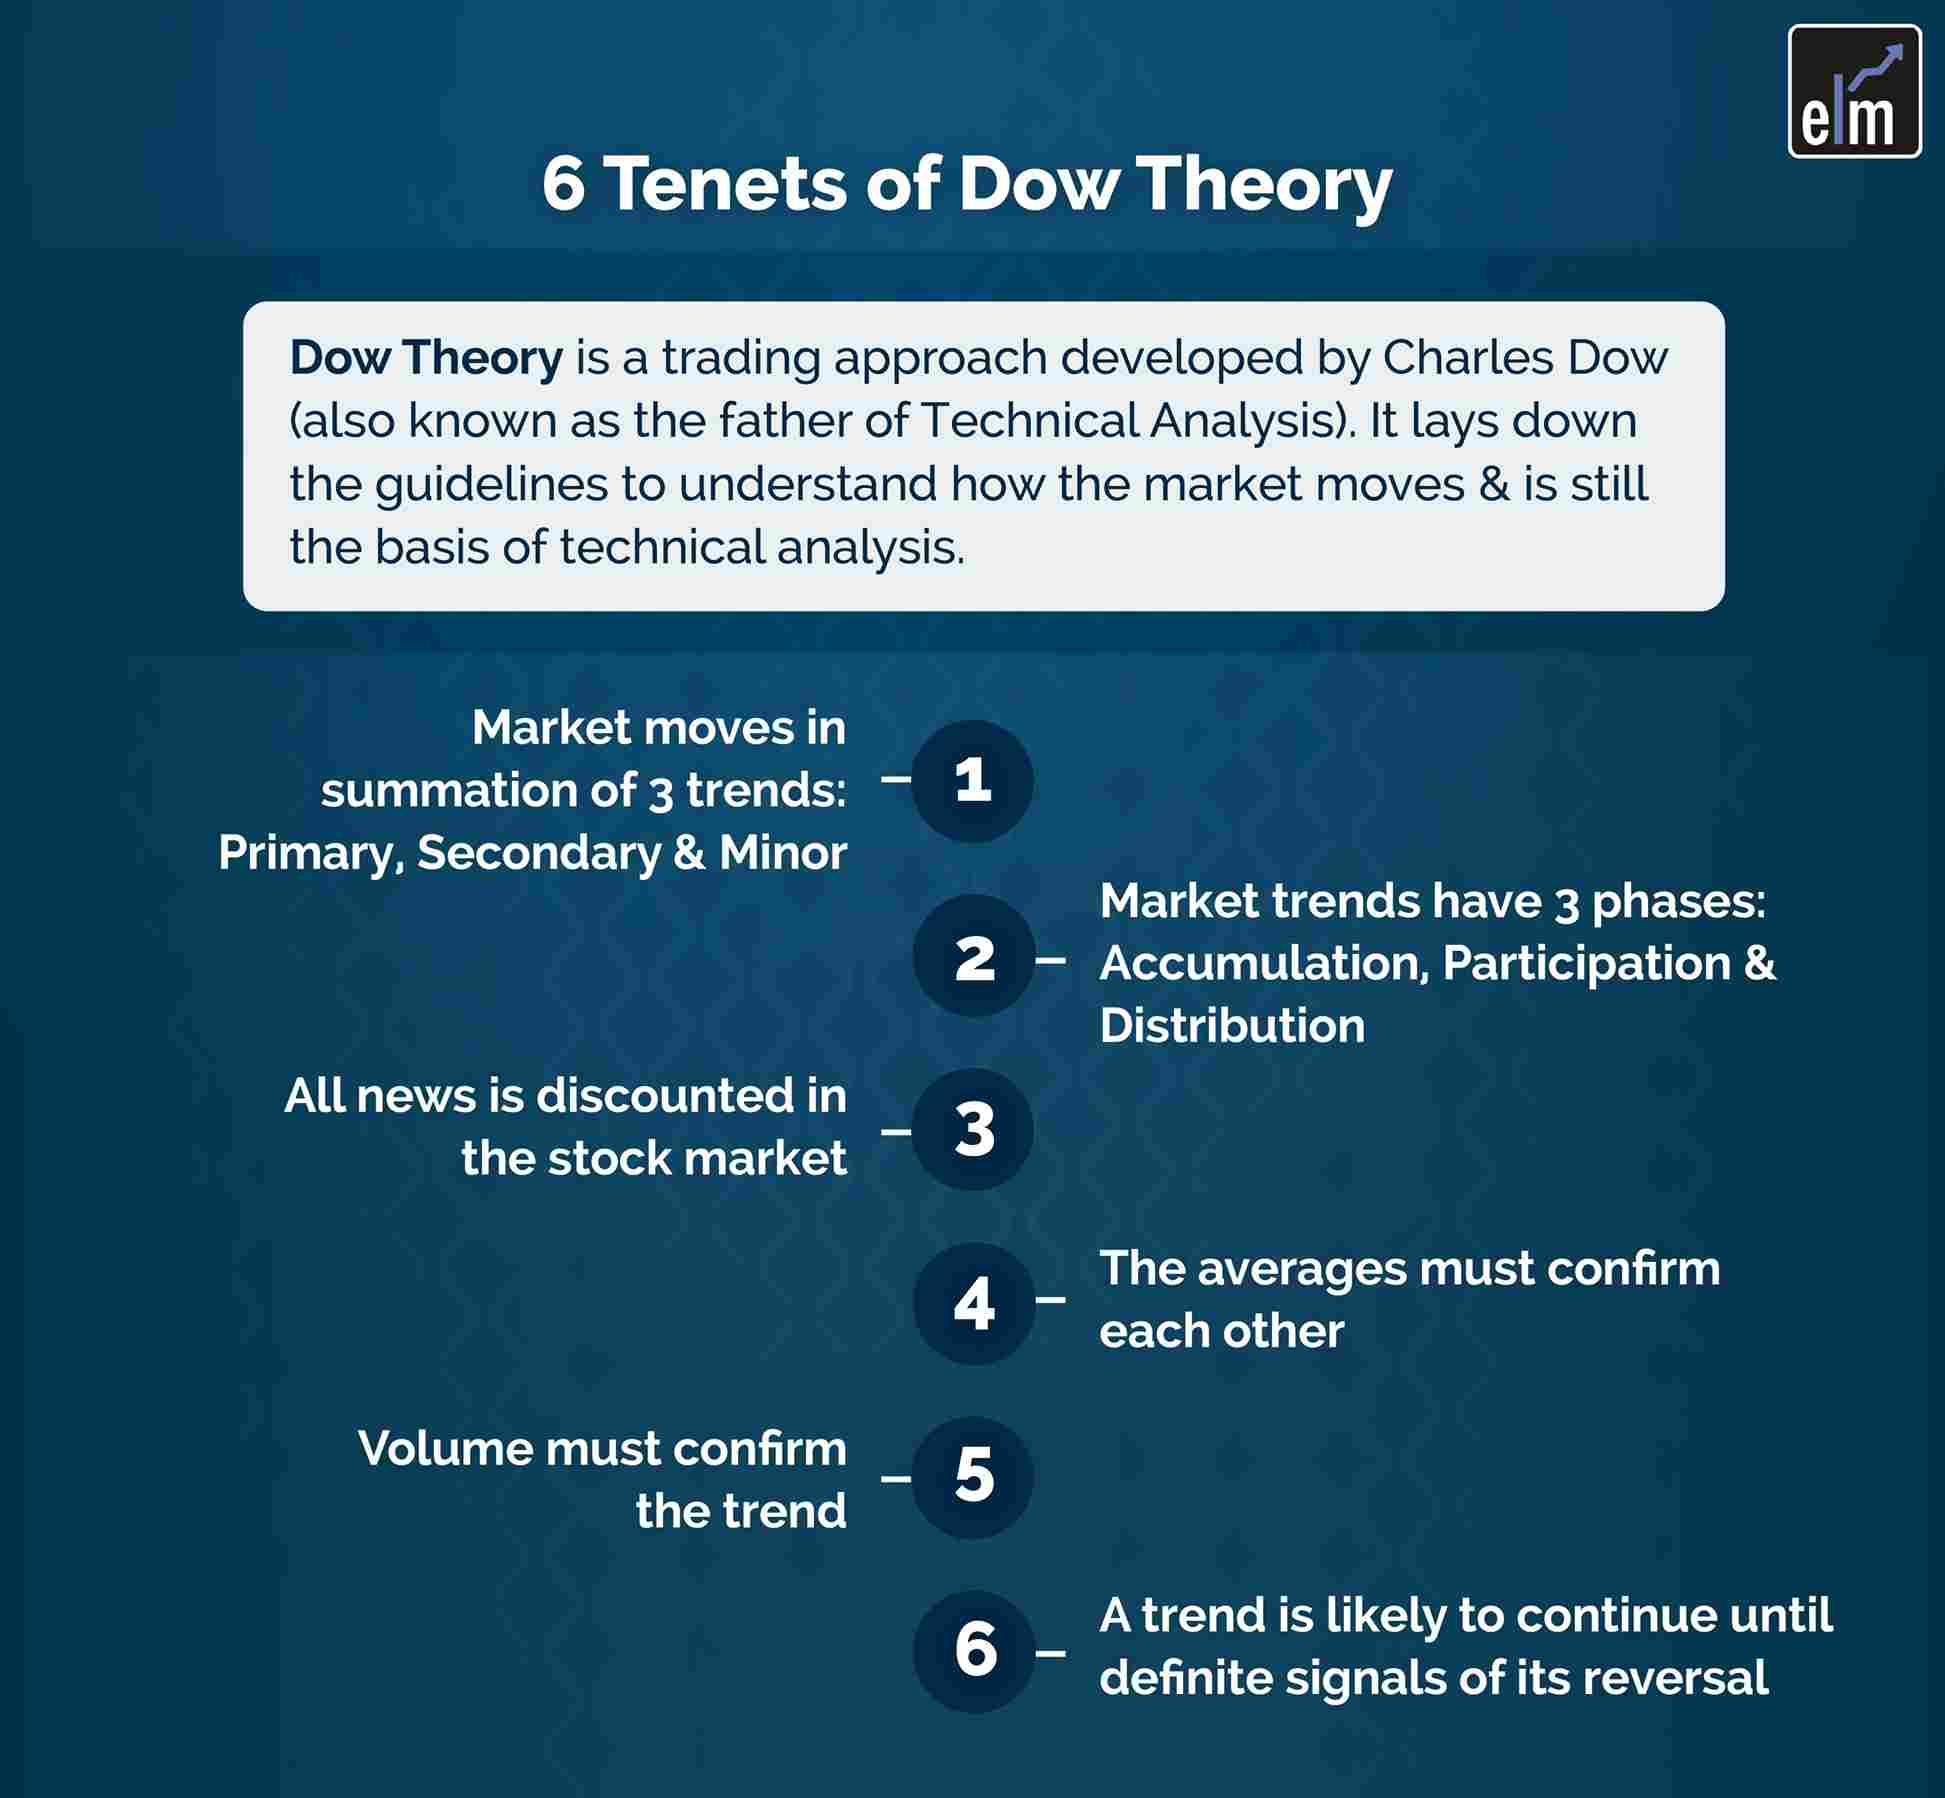 6 Tenets of Dow Theory - The Modern Study of Technical Analysis 2